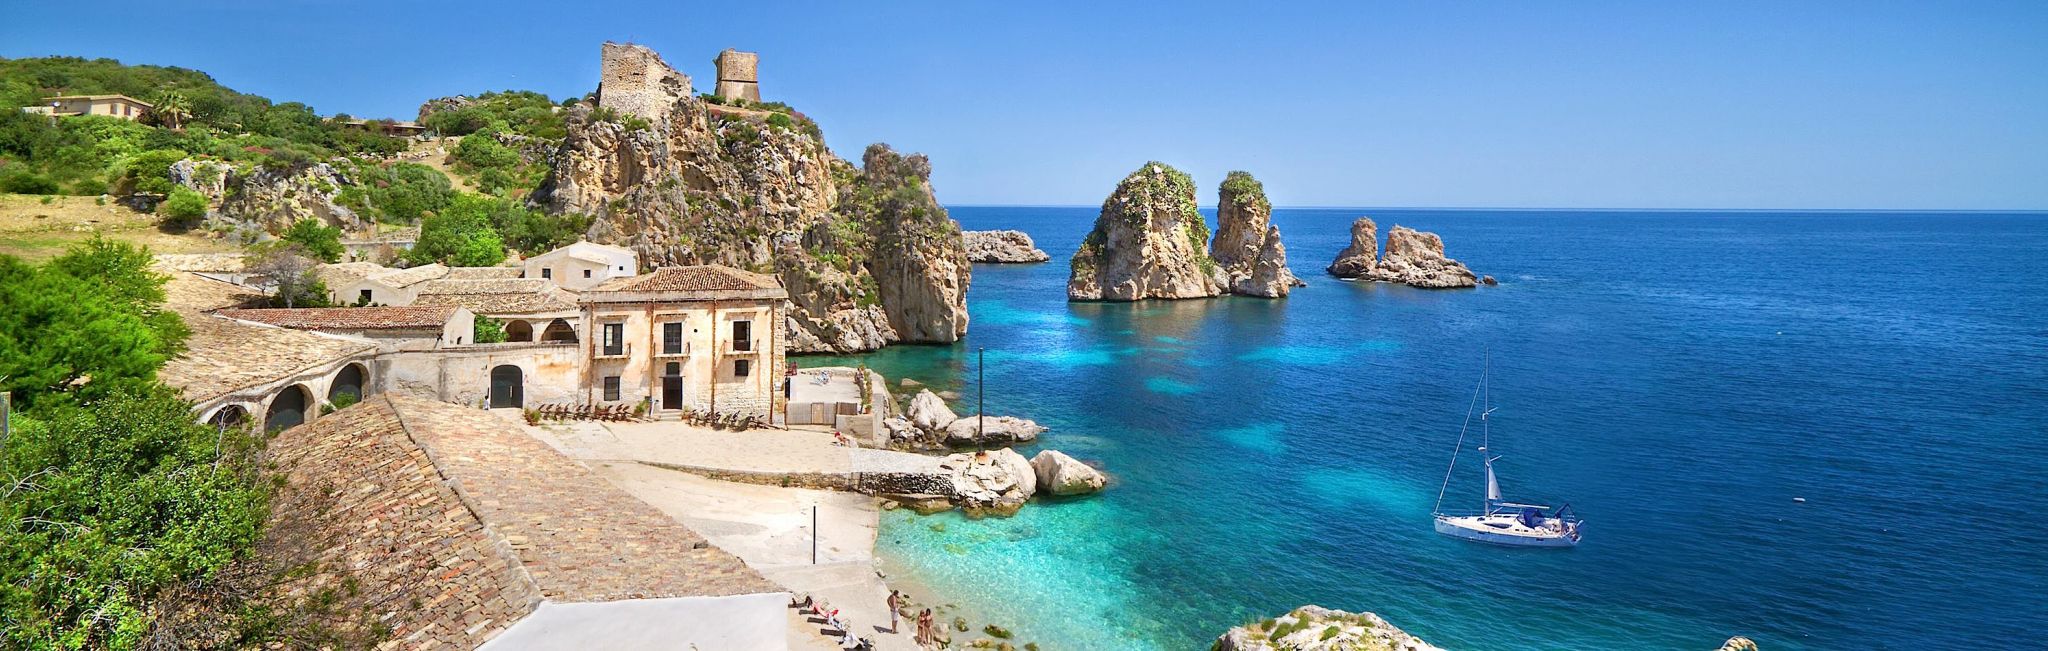 tour packages for sicily